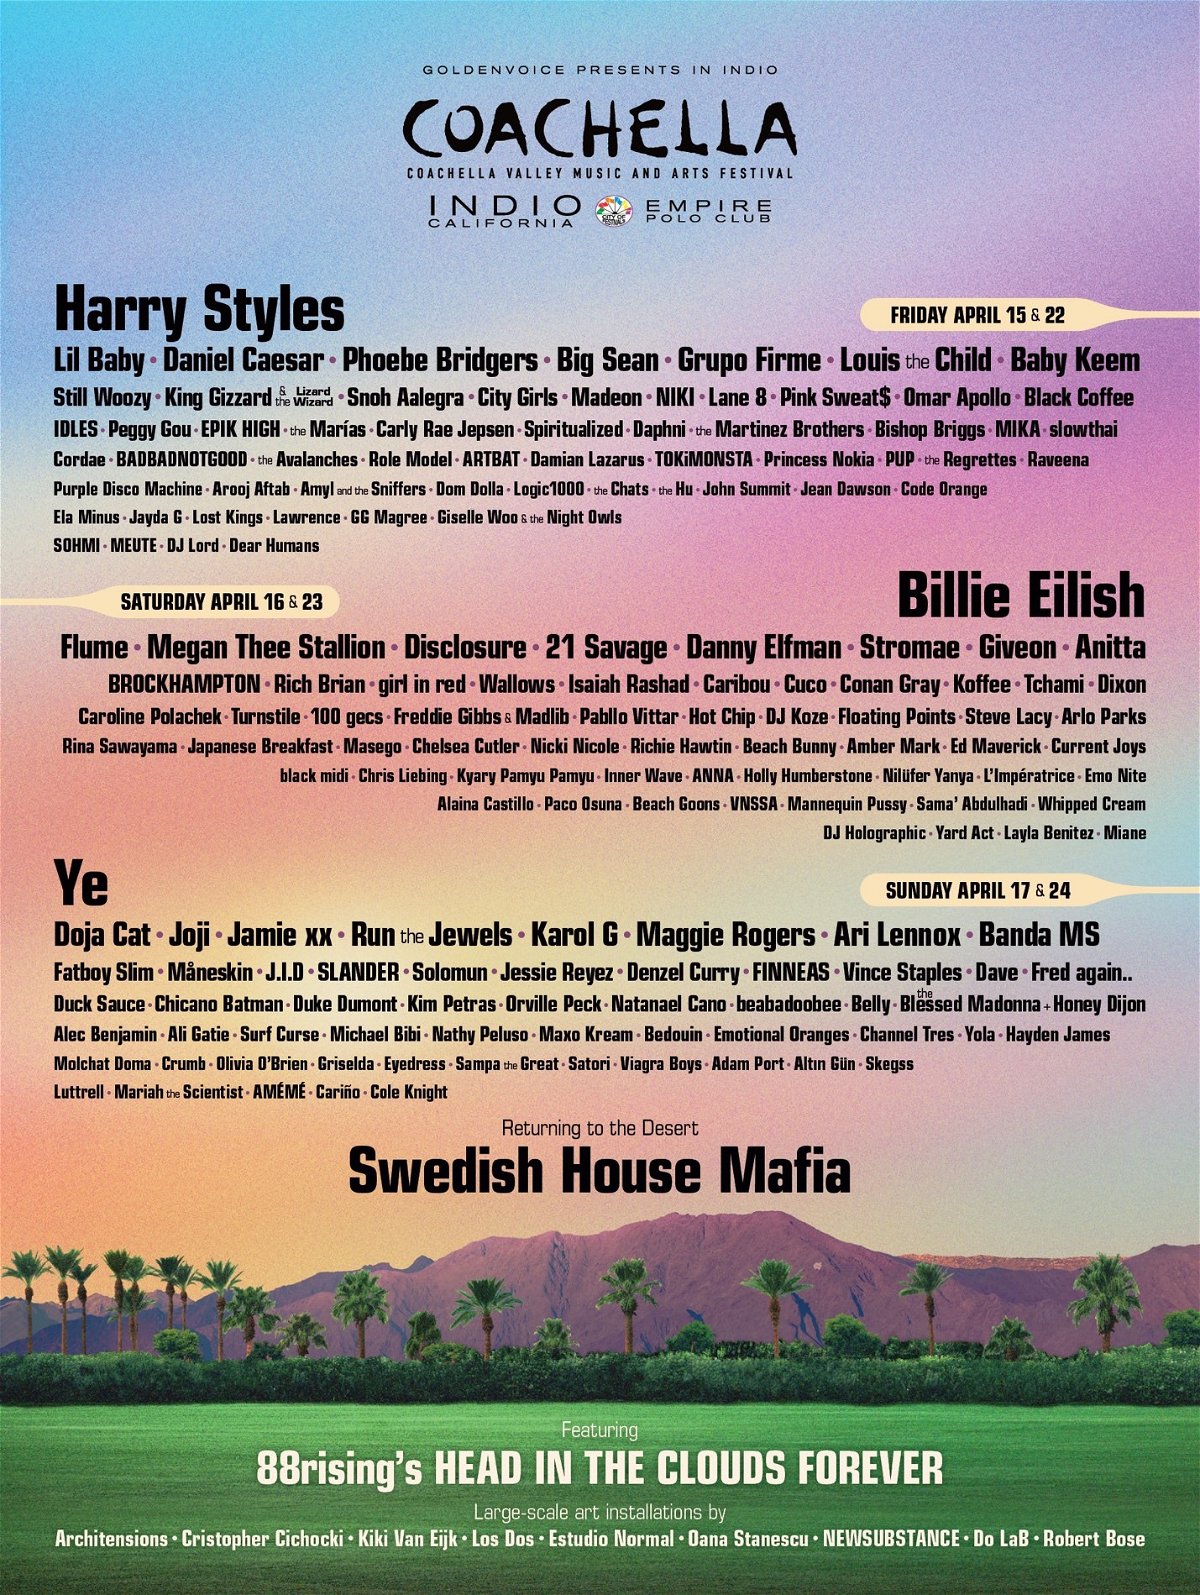 Coachella Music & Arts Festival passes on their way to attendees KESQ